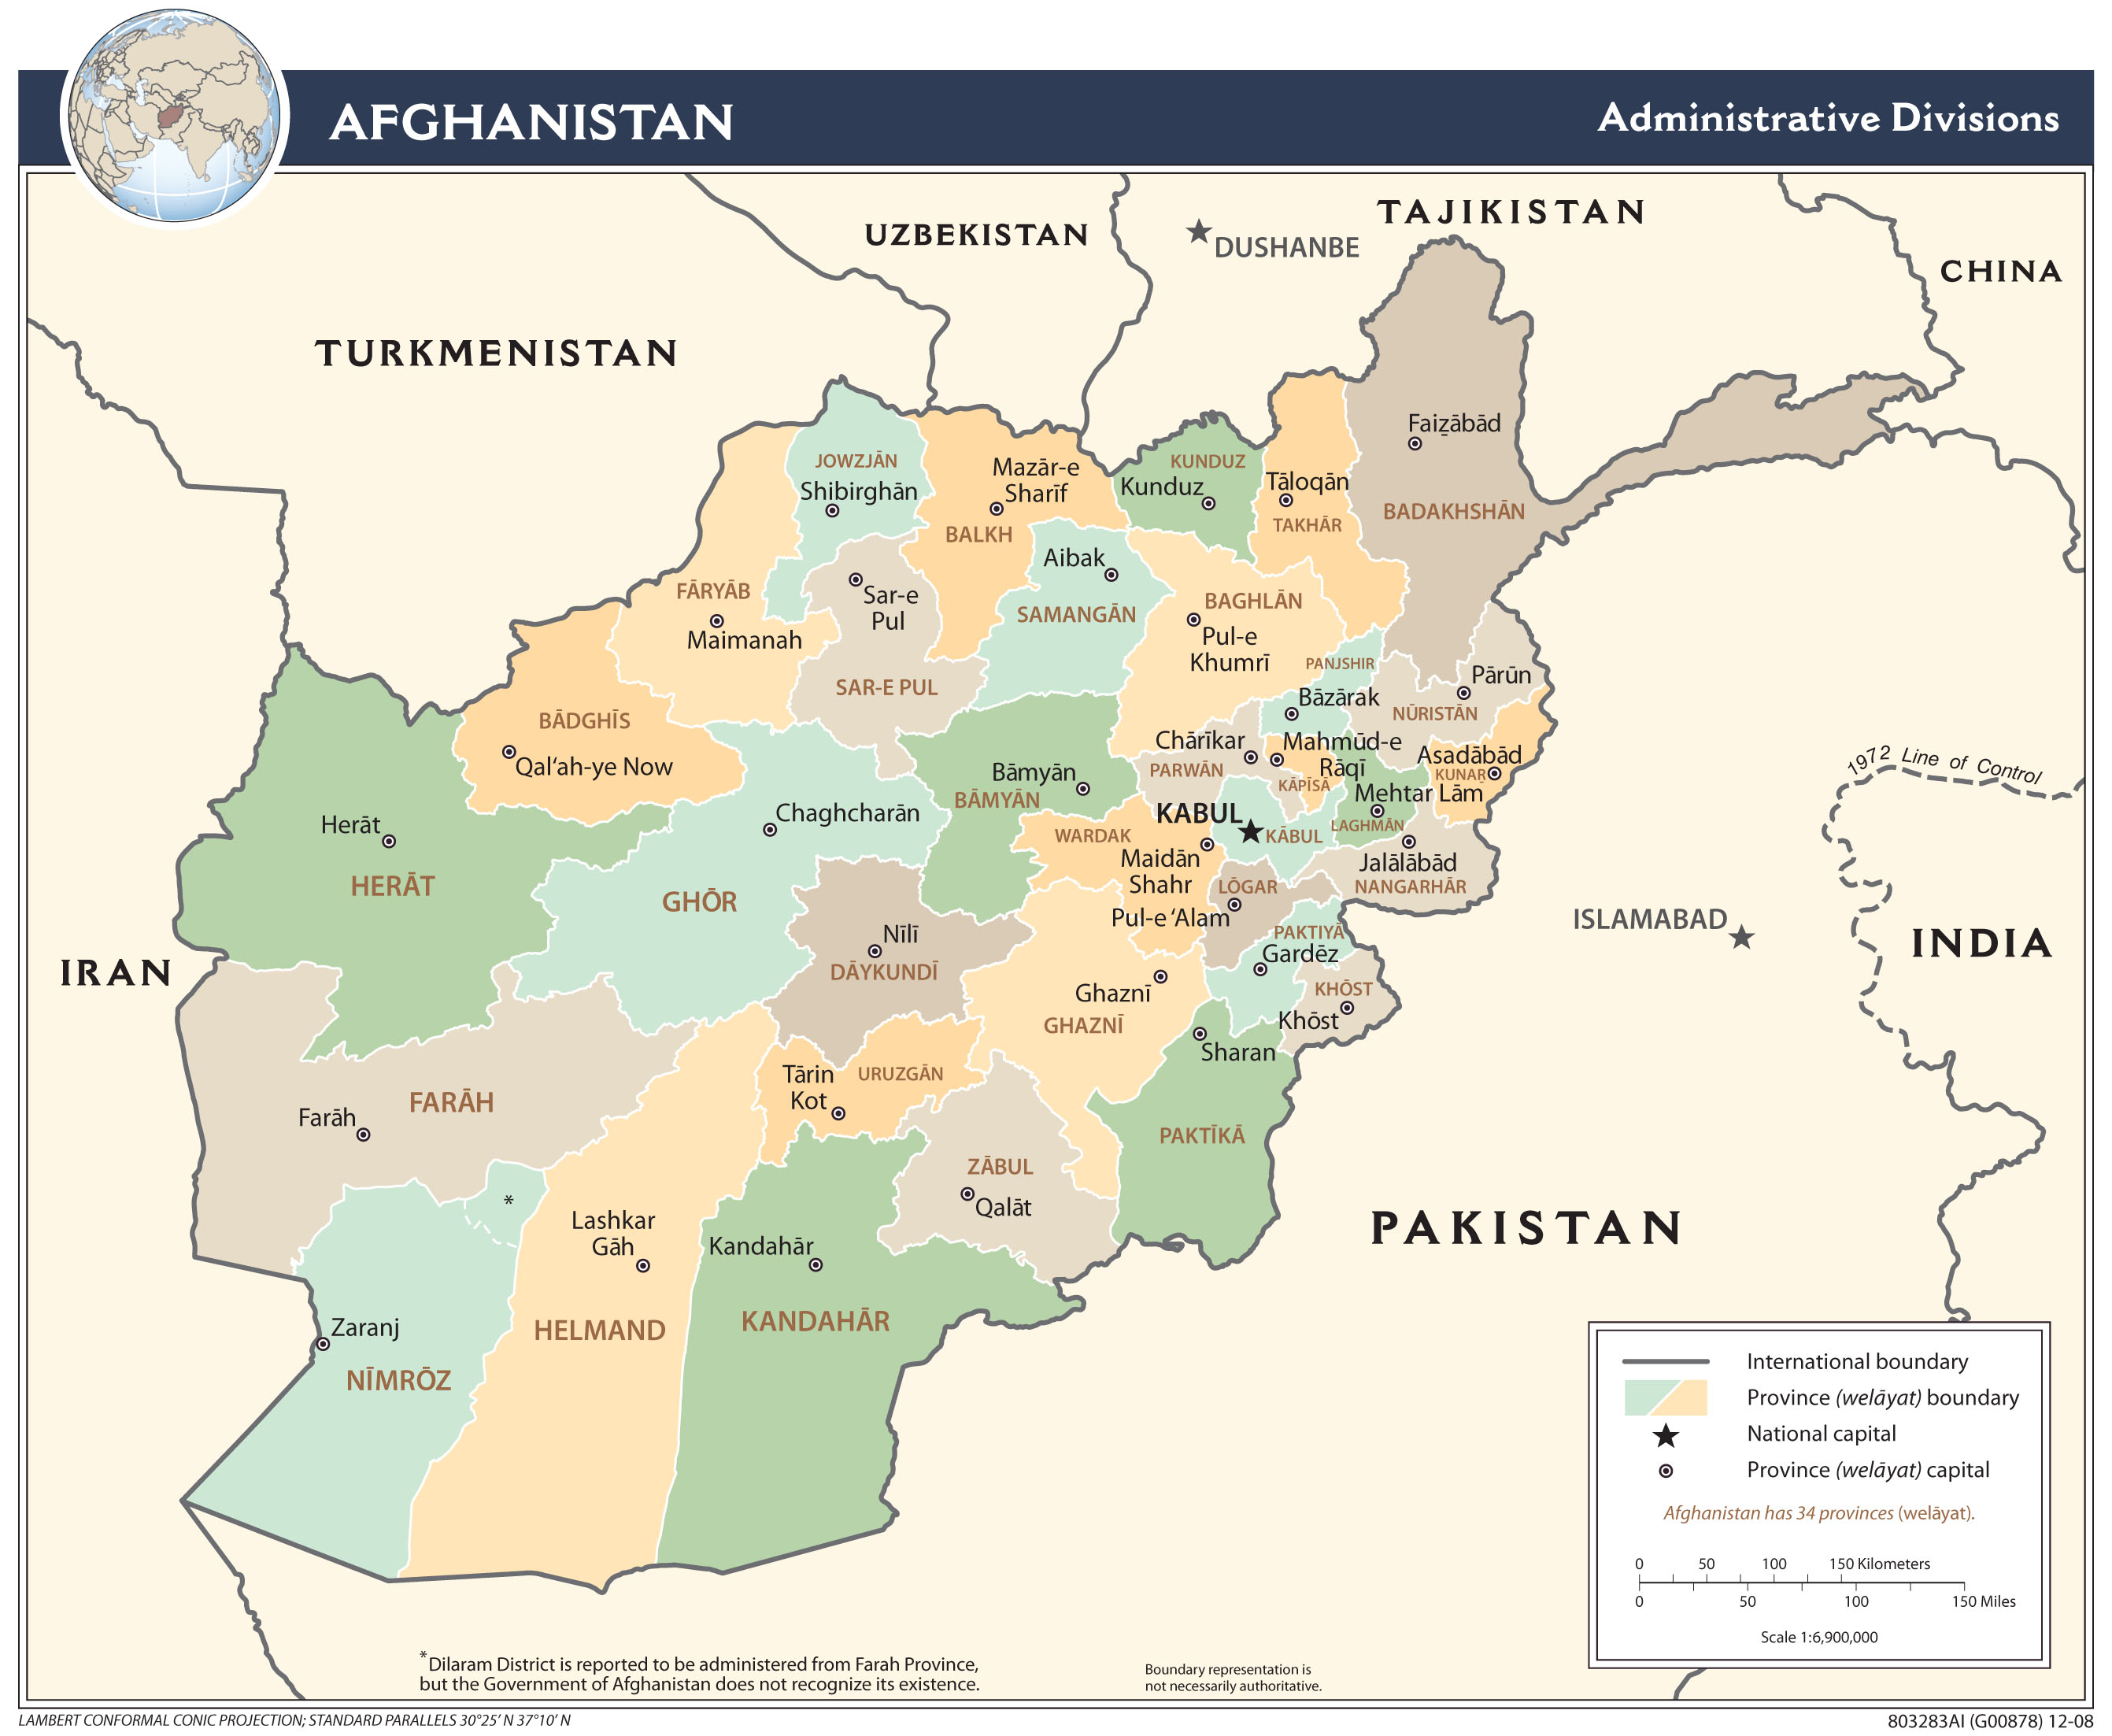 mapa afghanistan Afghanistan Maps   Perry Castañeda Map Collection   UT Library Online mapa afghanistan